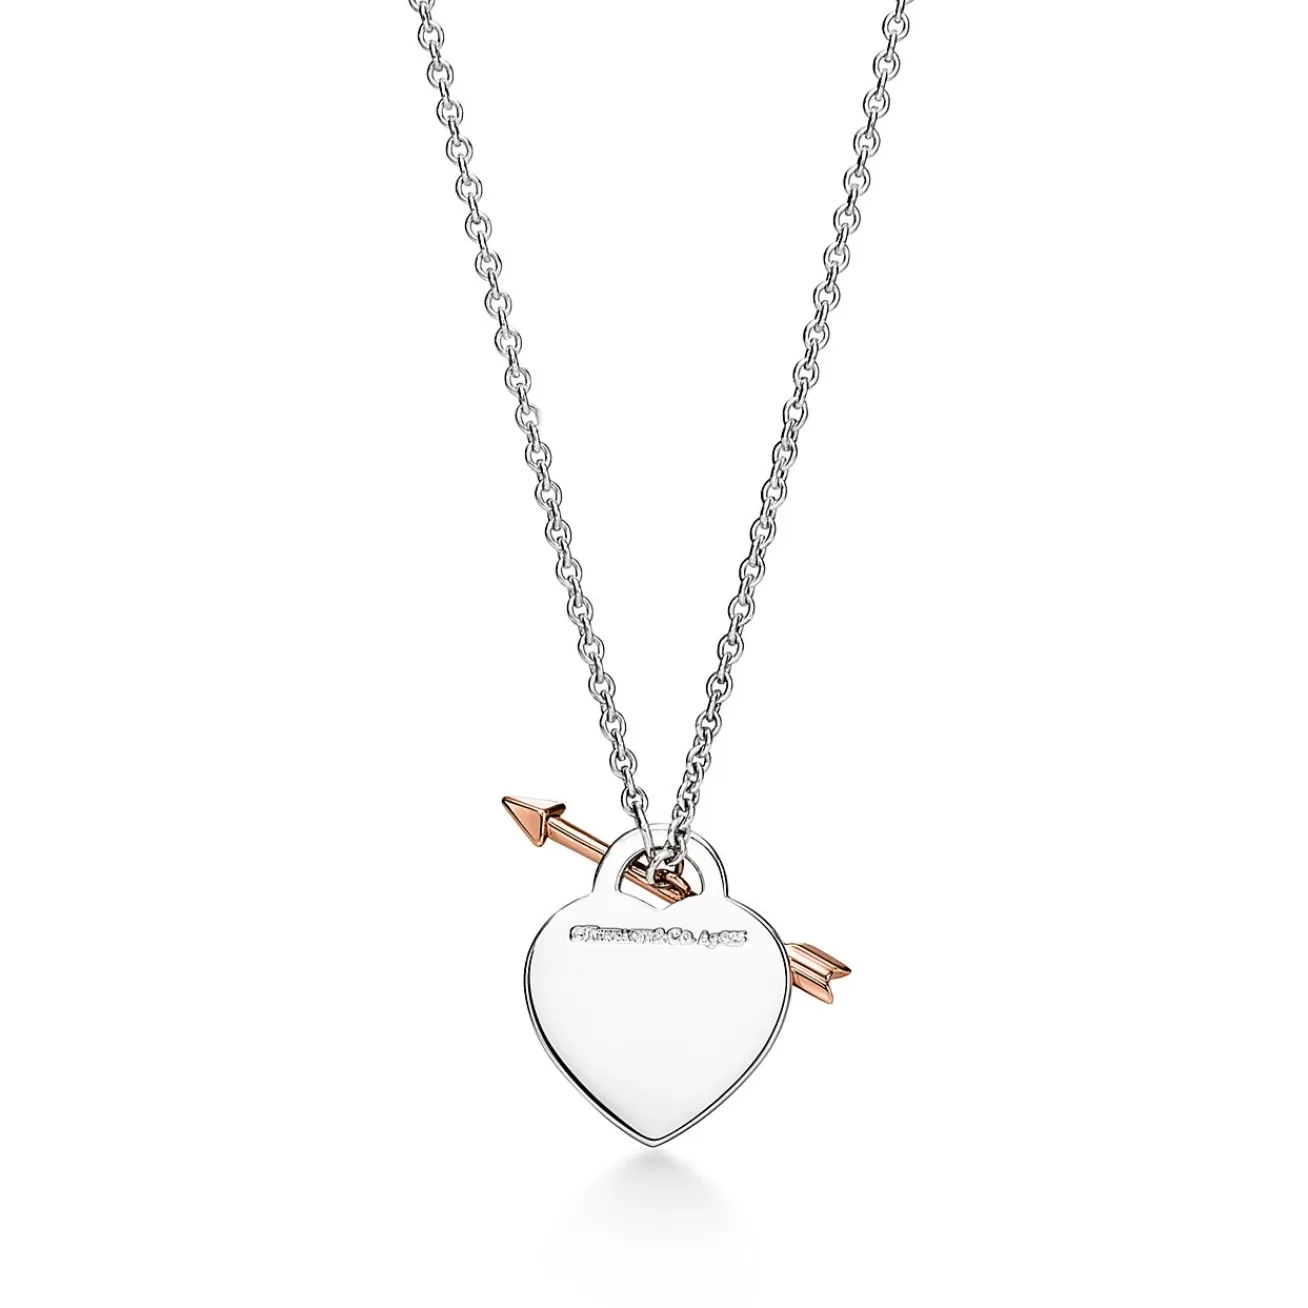 Tiffany & Co. Return to Tiffany® Lovestruck Heart Tag Pendant in Silver and Rose Gold, Medium | ^ Necklaces & Pendants | Gifts for Her